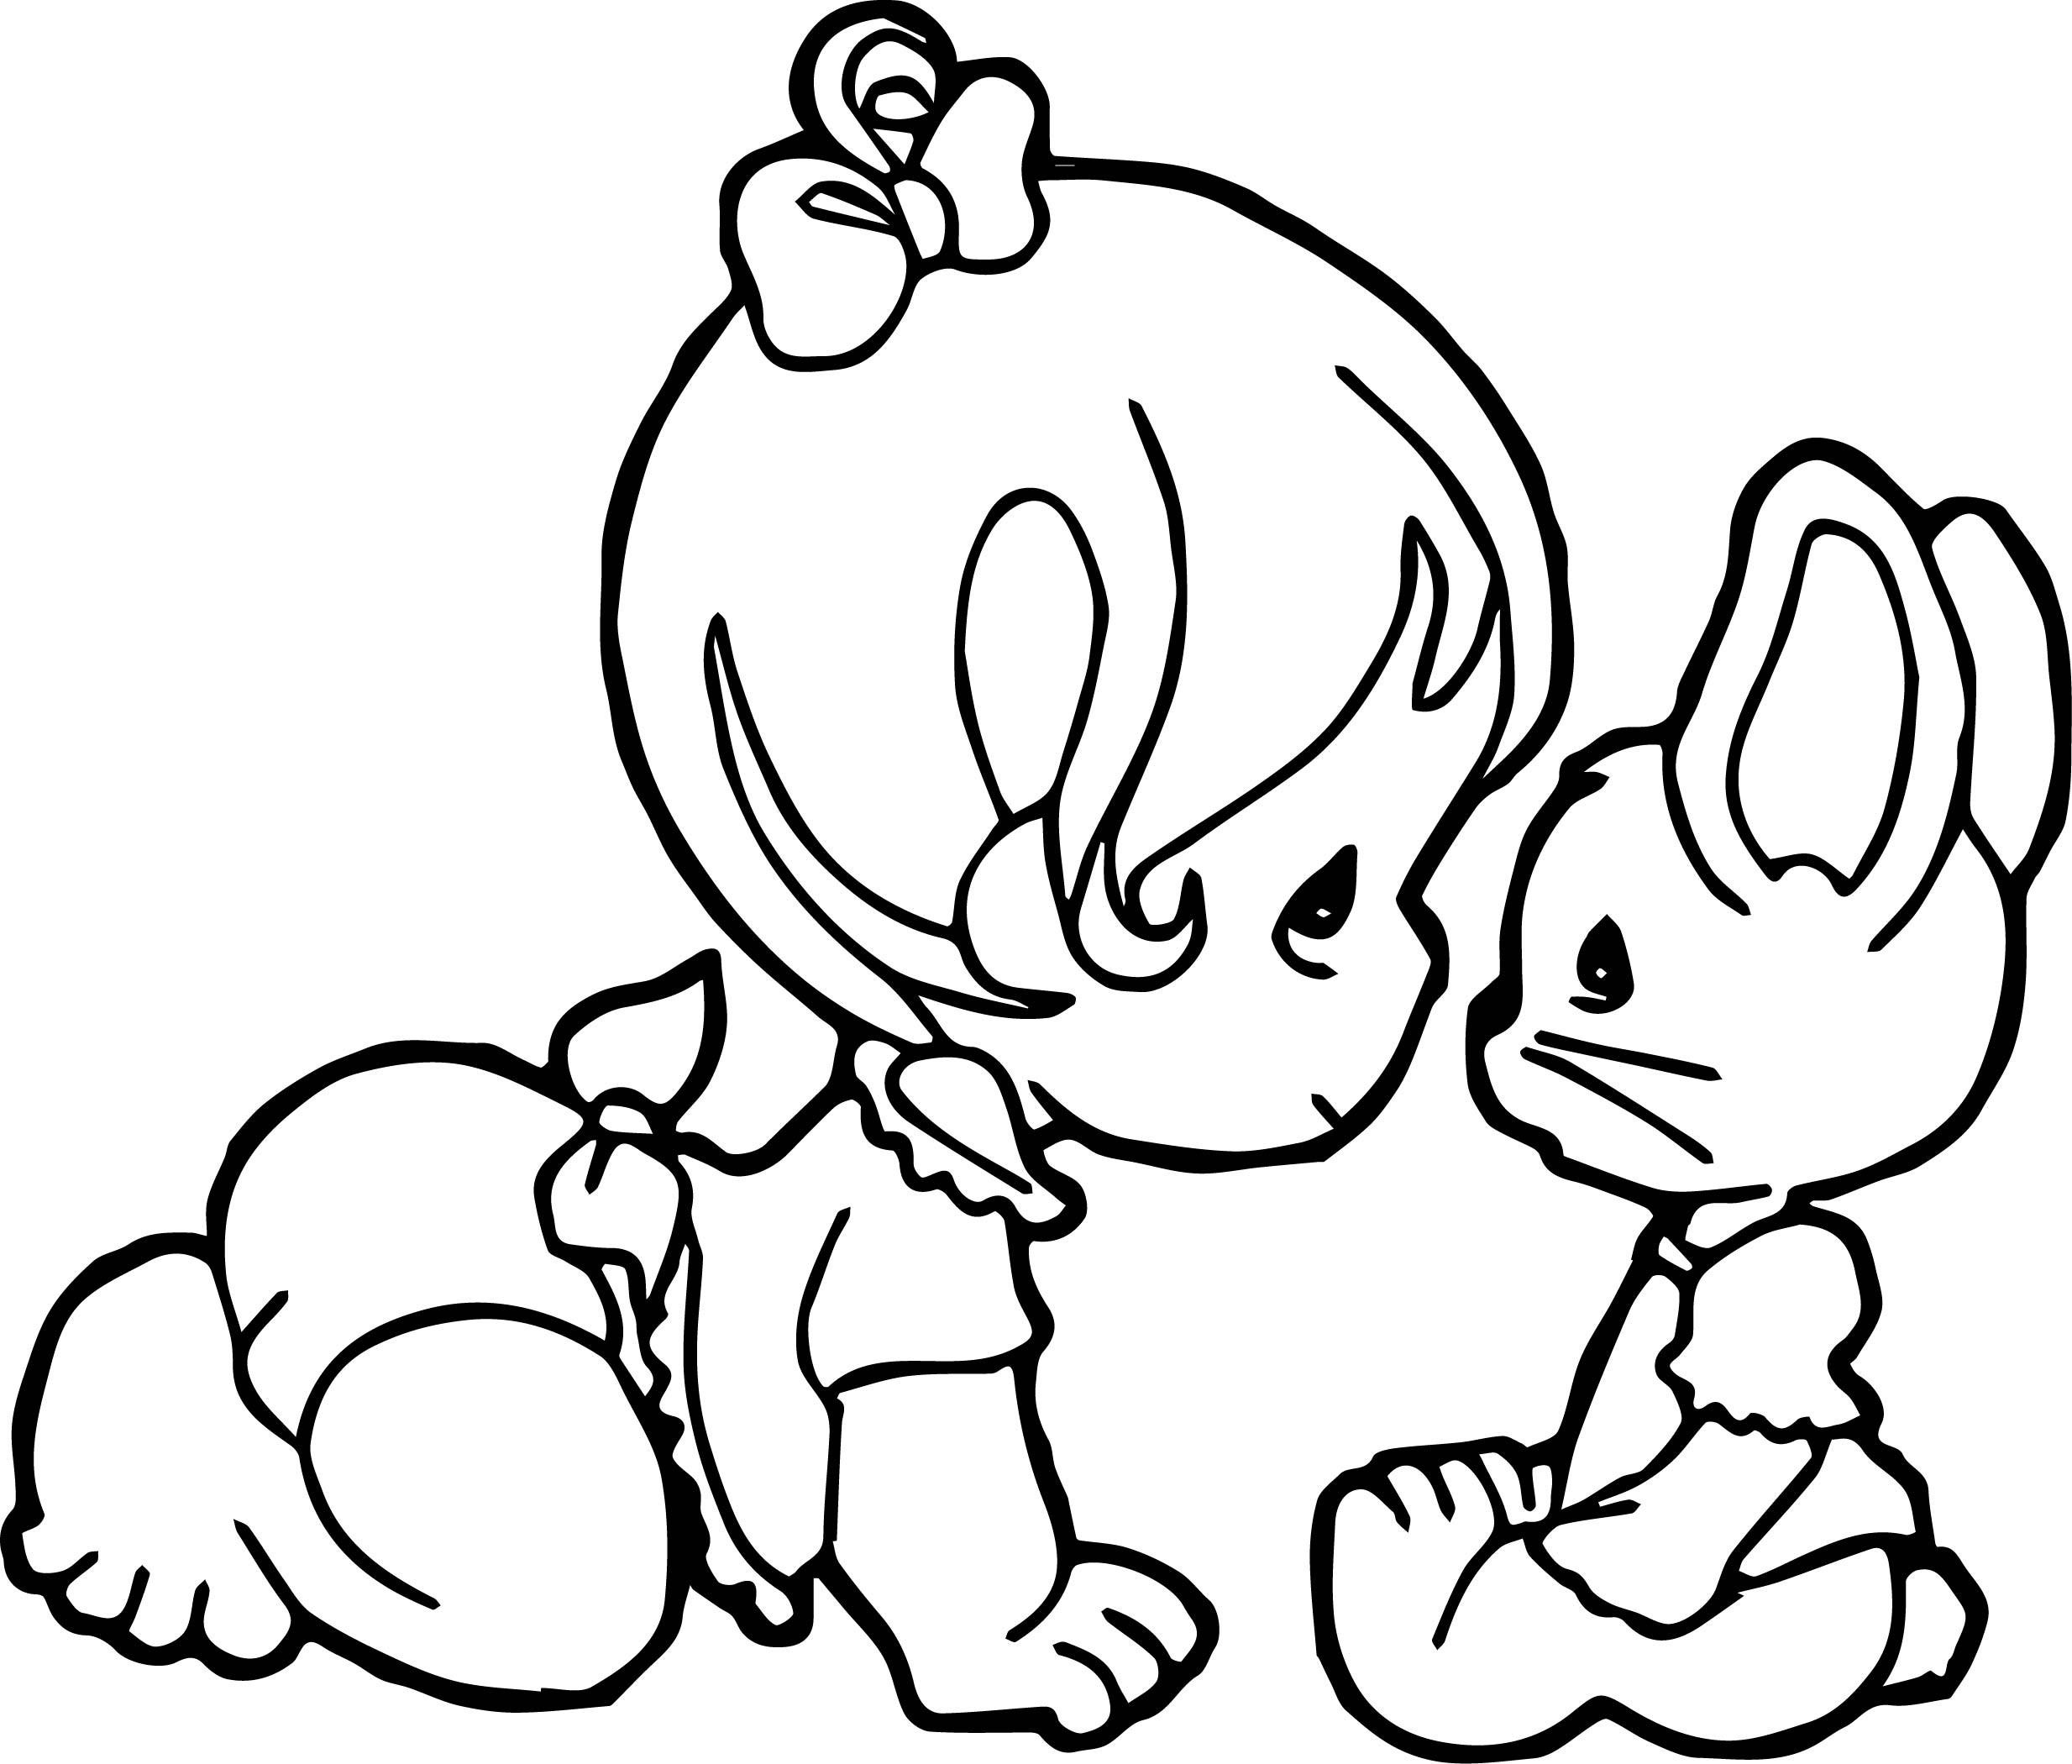 Toddler Girl Coloring Pages
 Baby Girl Cartoon And Bunny Coloring Page